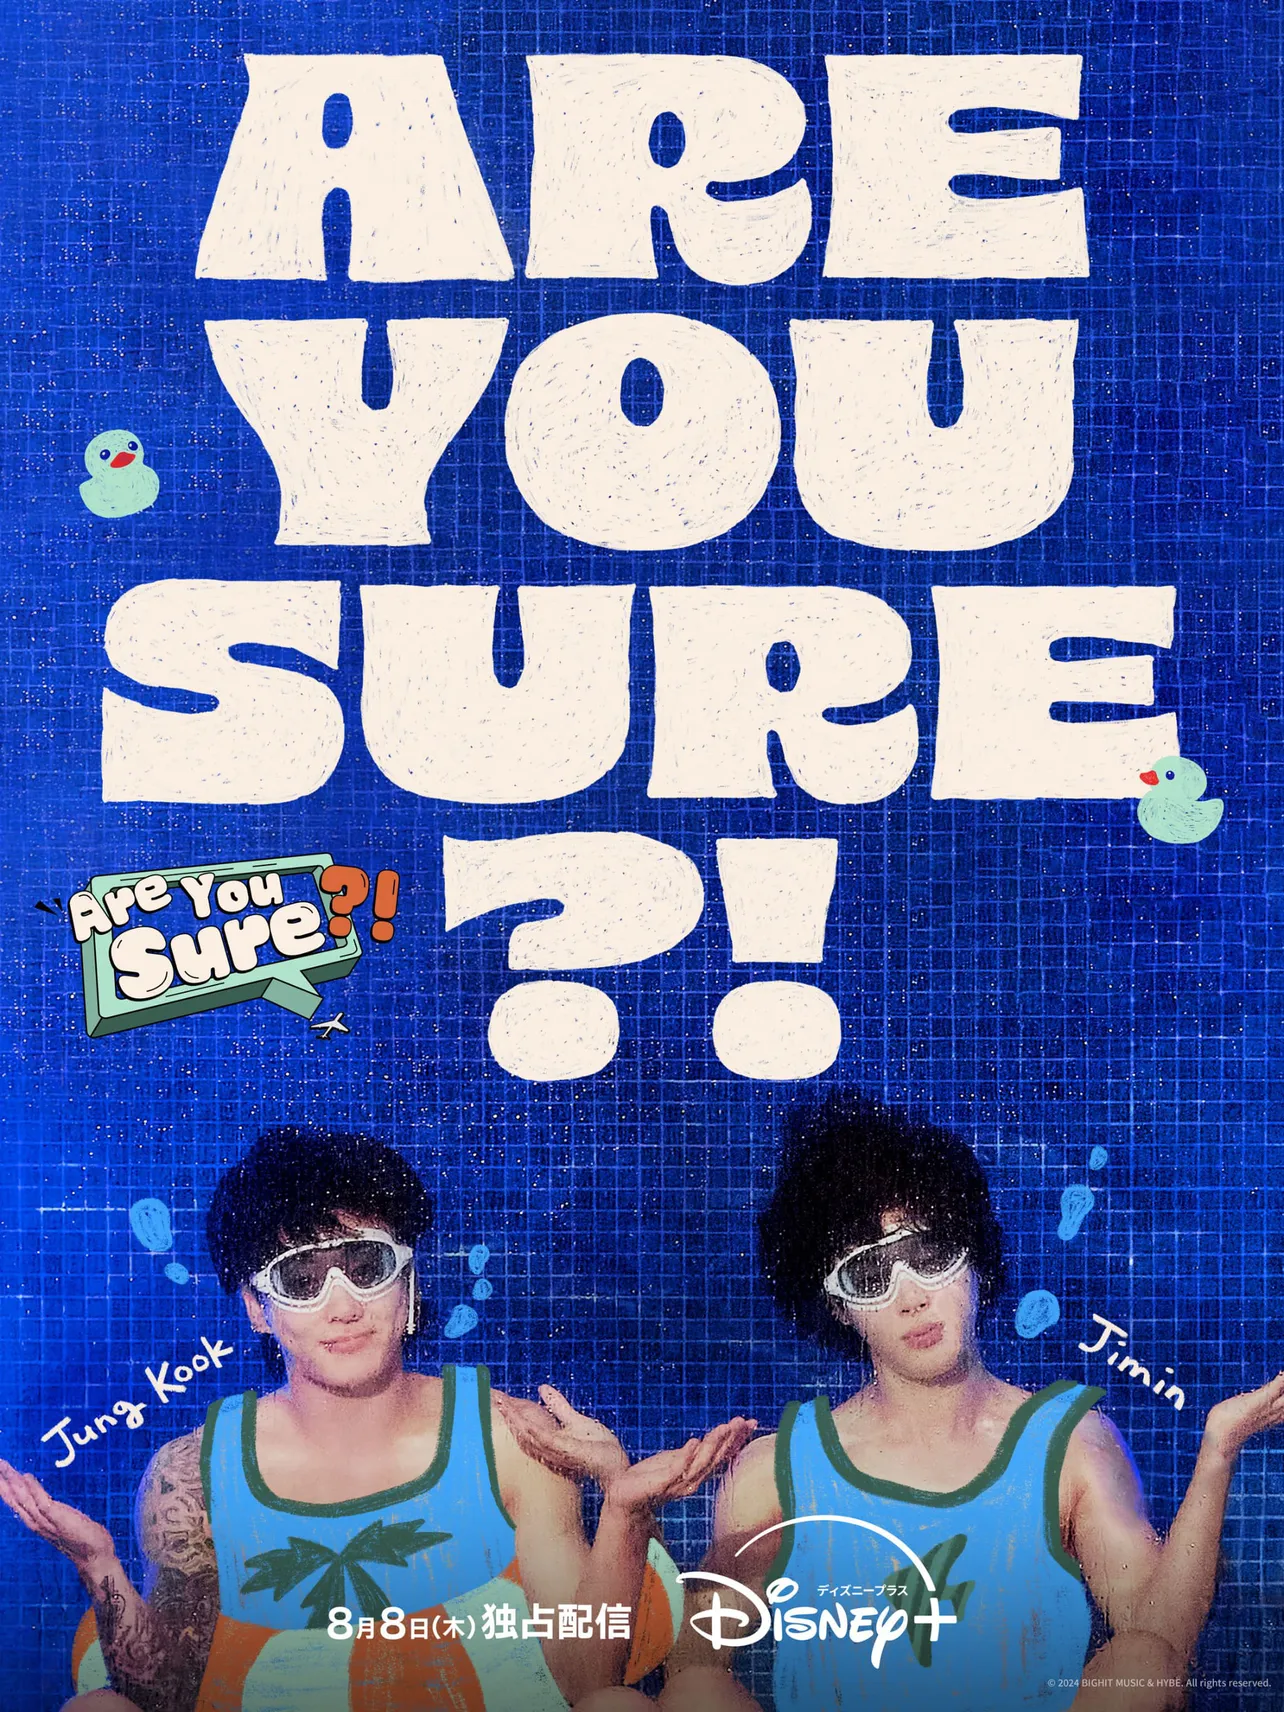 「Are You Sure?!」ディズニープラスにて8月8日(木)より独占配信開始